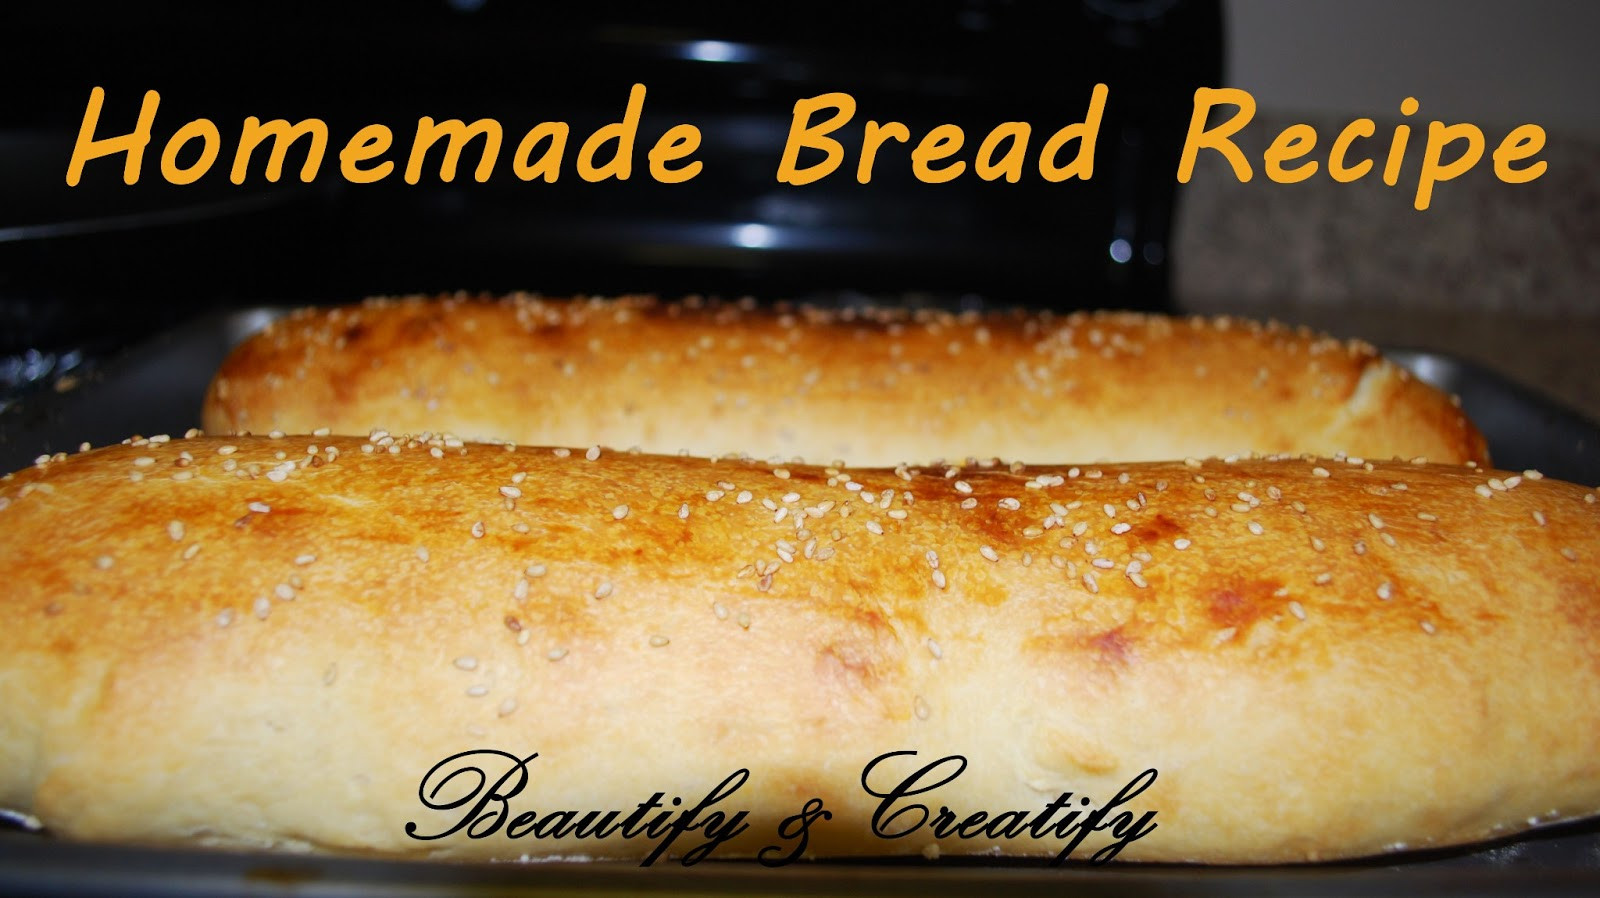 Best Homemade Bread Recipe
 Beautify and Creatify Easy Homemade Bread Recipe